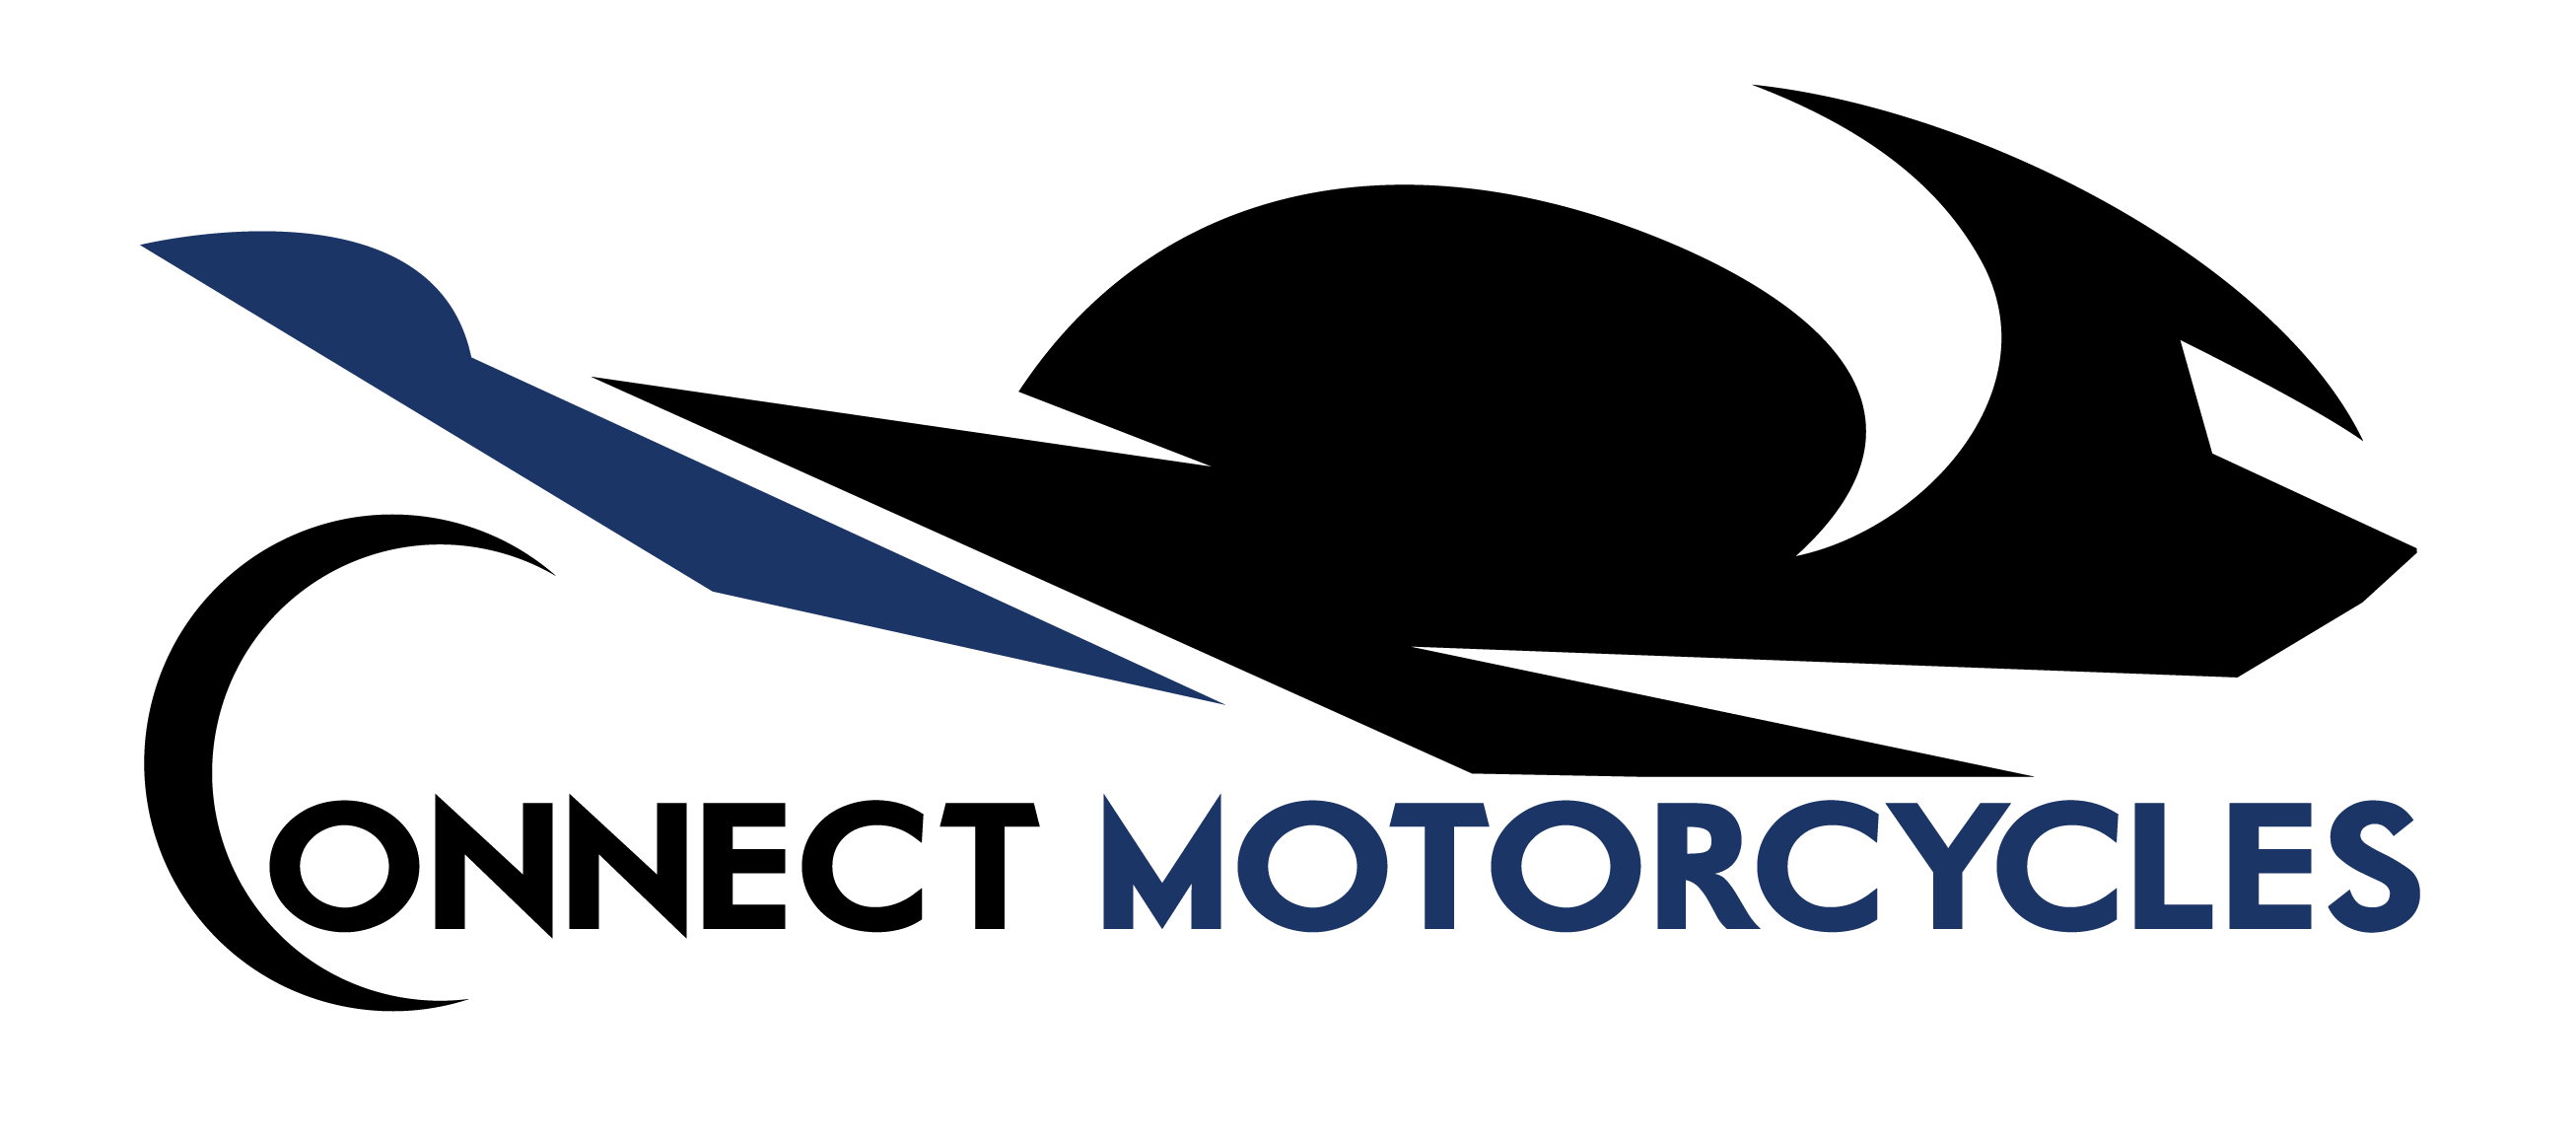 Connect Motorcycles